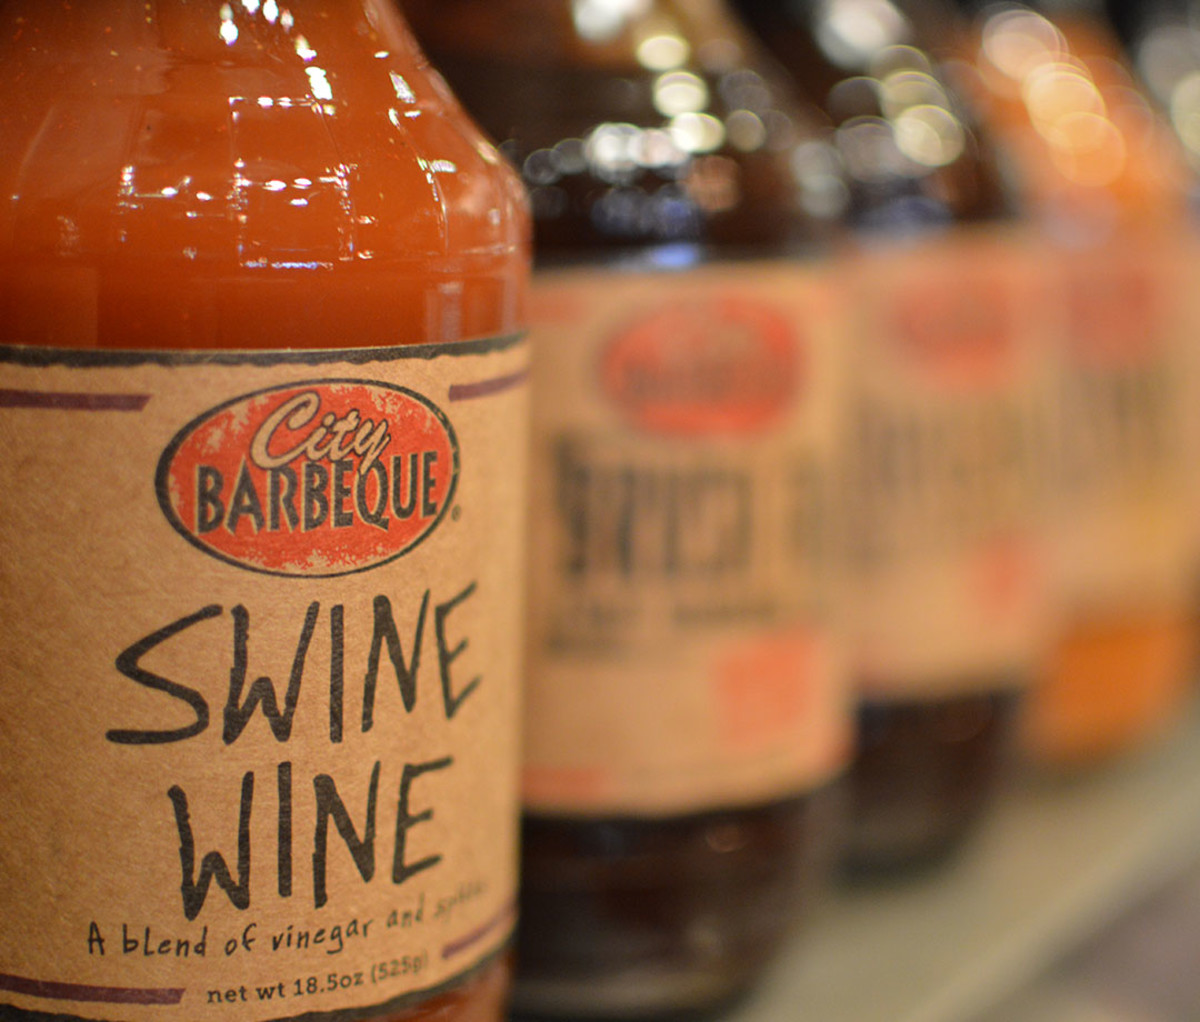 We Tried a Bunch of BBQ Sauces. These Are the Best - CNET